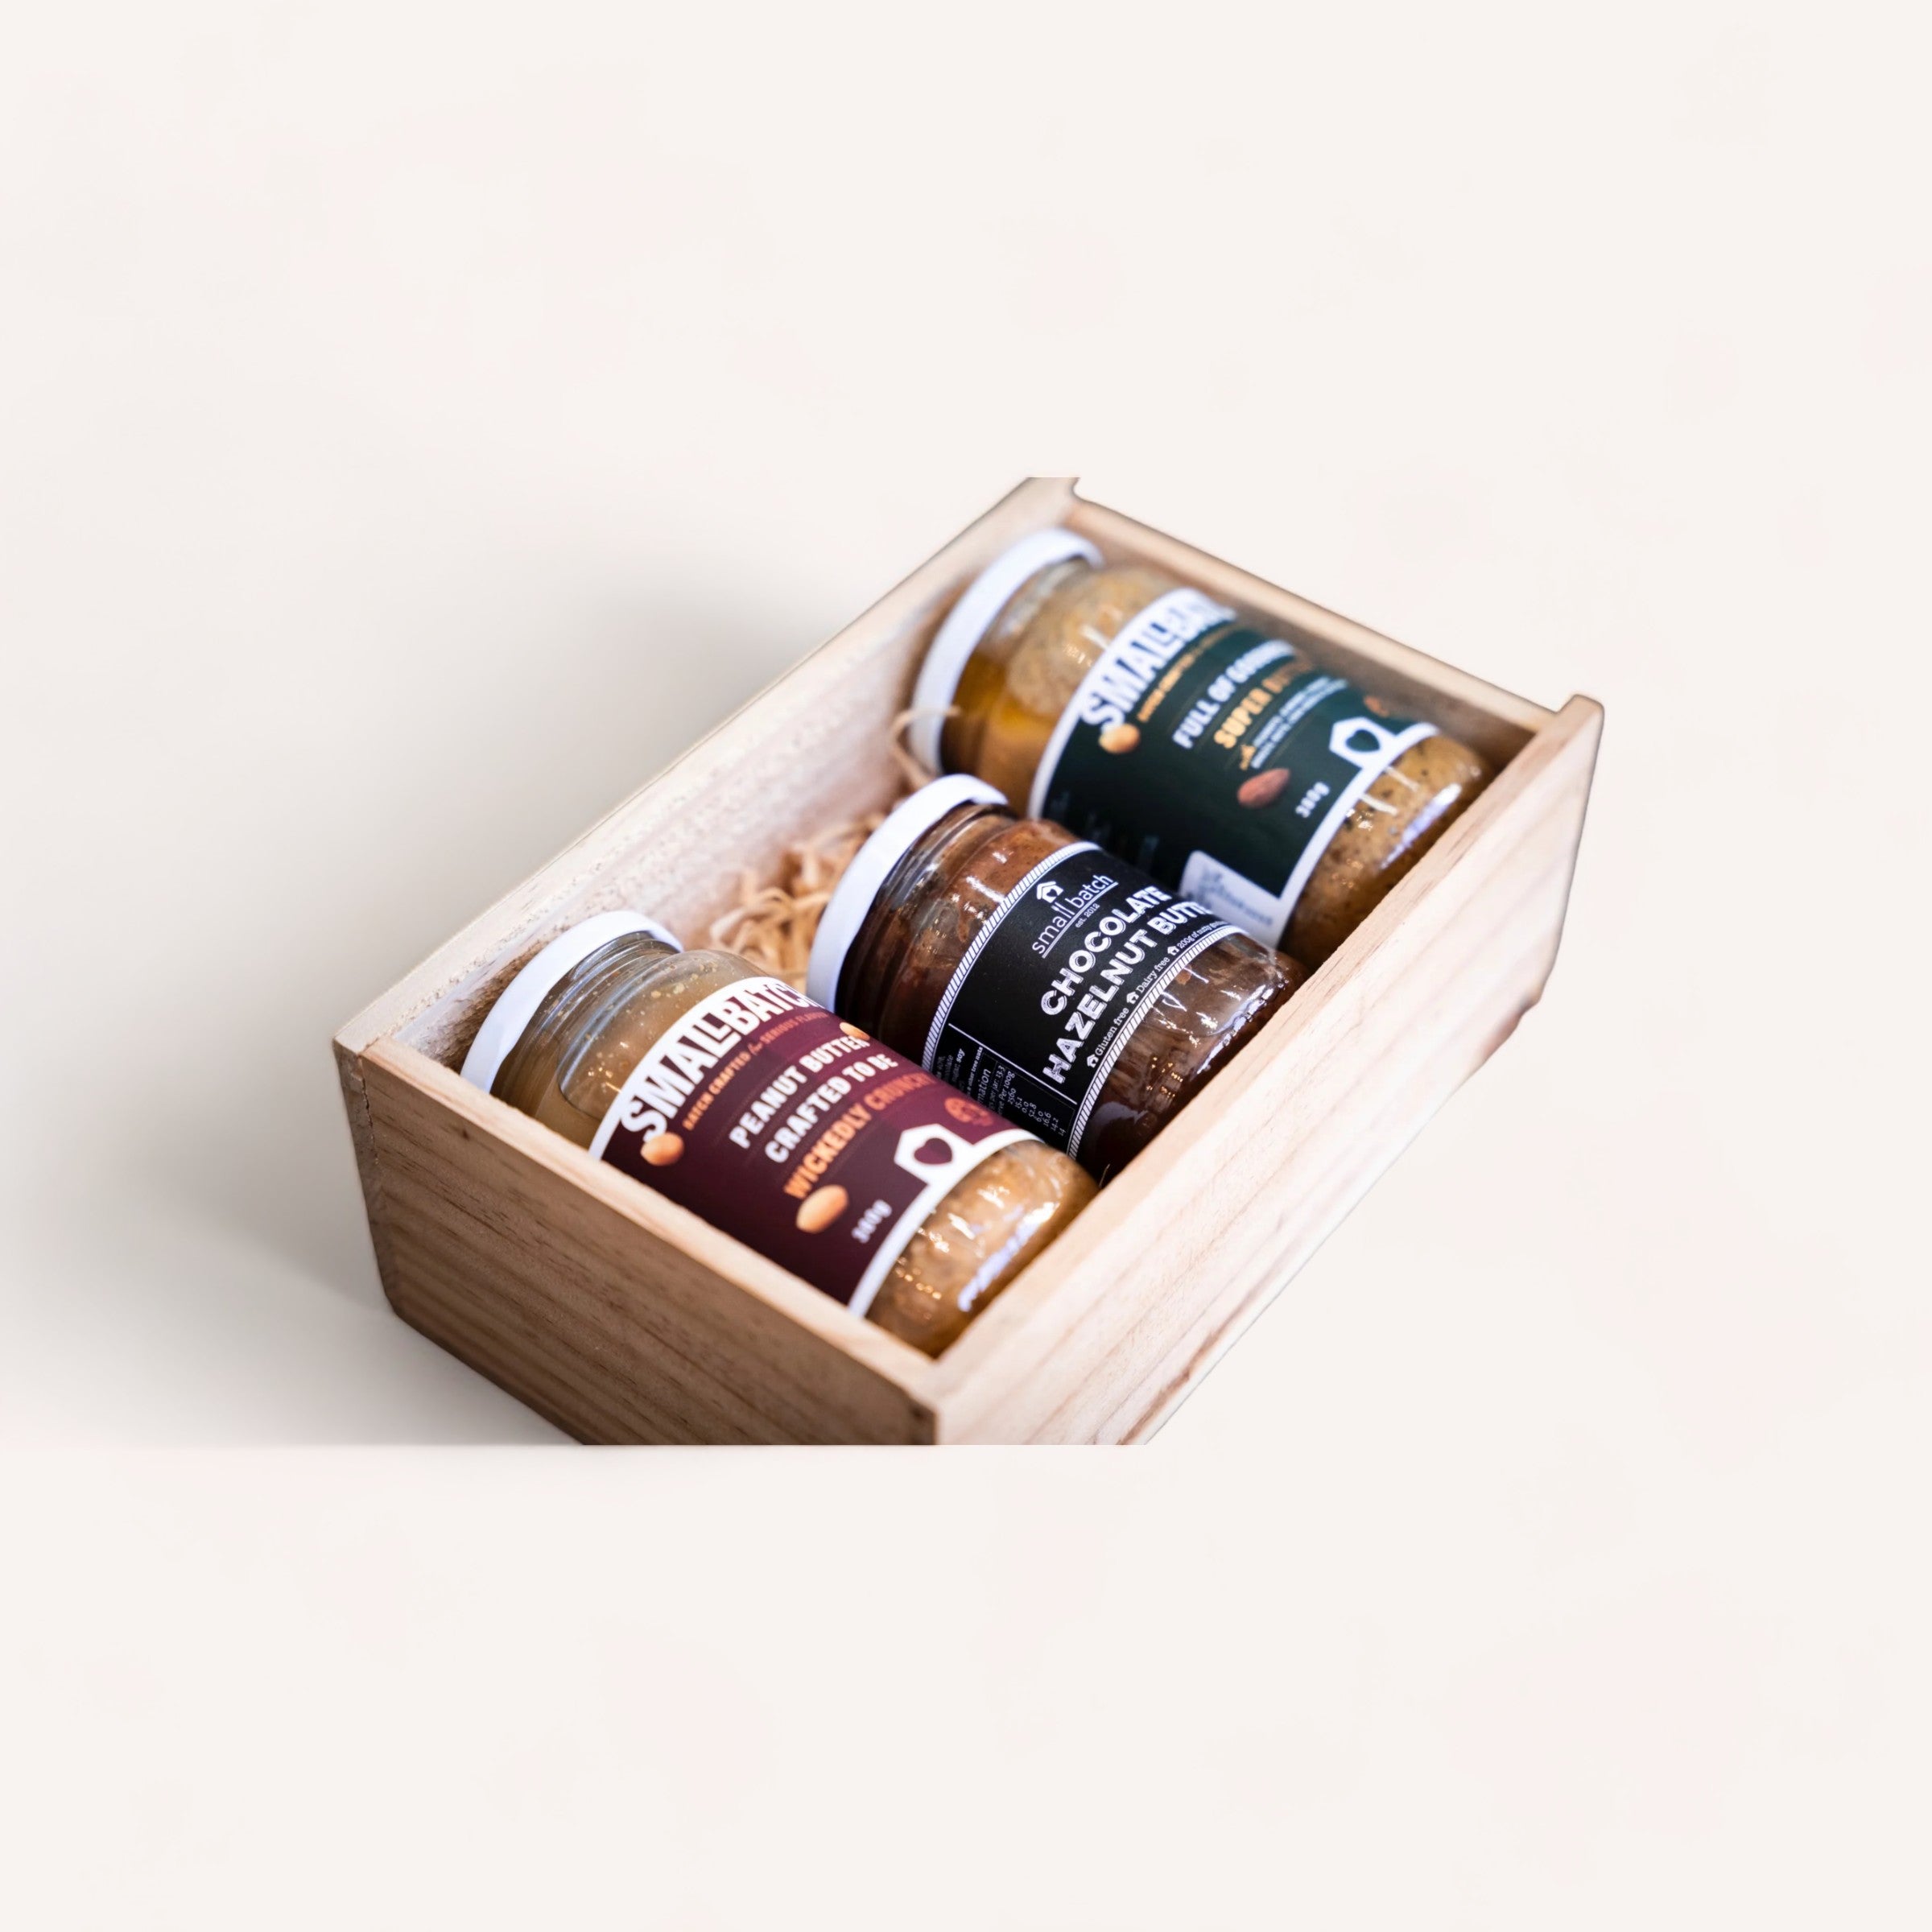 A wooden gift box containing a selection of Spread the Love gourmet small-batch spreads, including Spread the Love peanut butter and chocolate hazelnut butter.